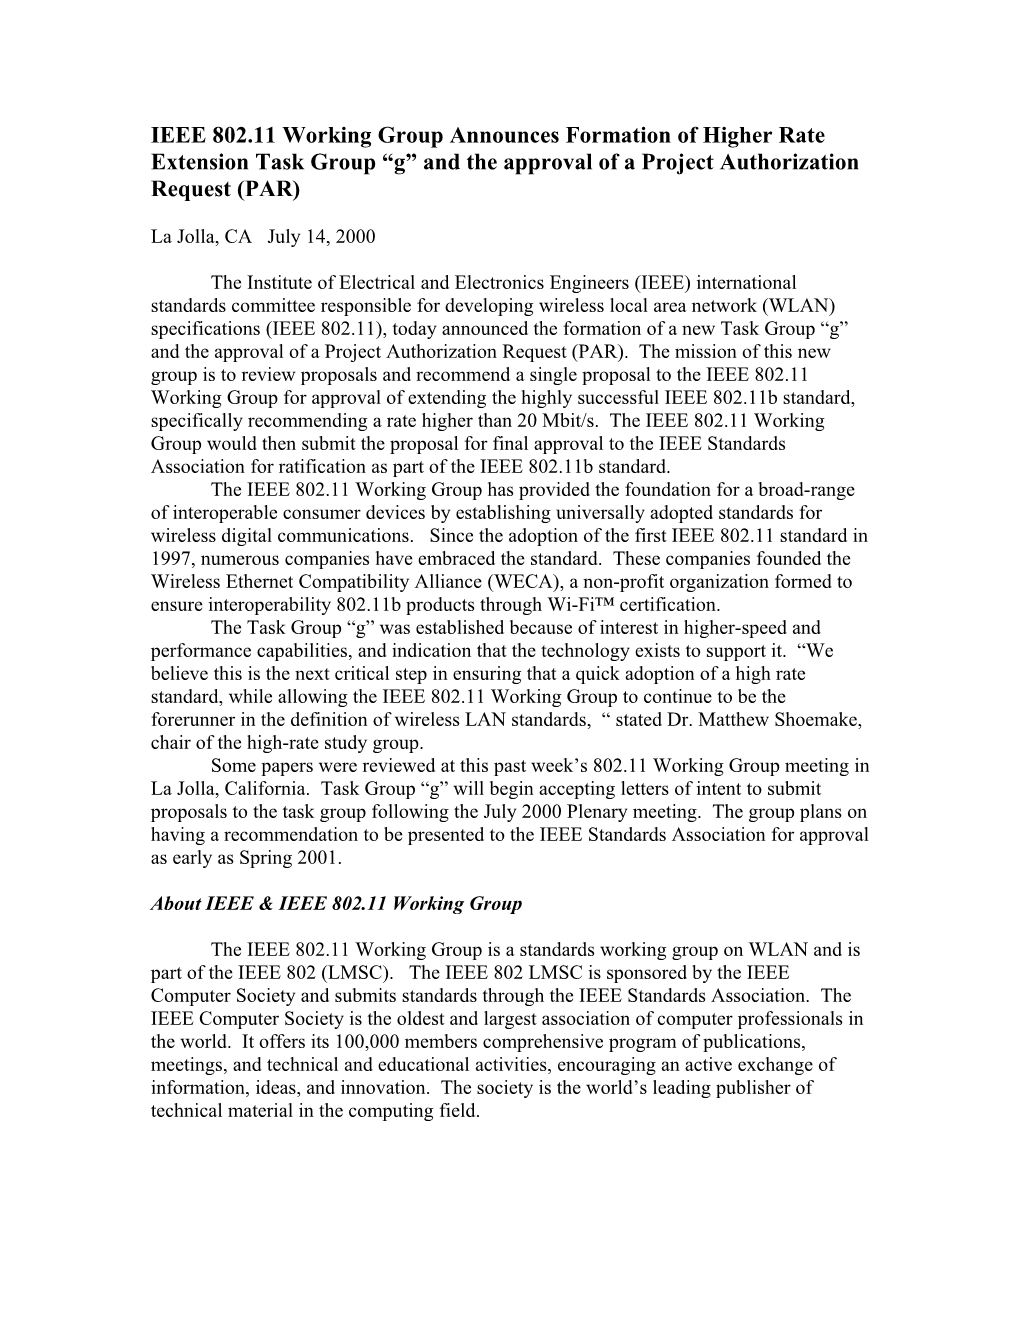 IEEE 802.11 Working Group Announces Formation of Higher Rate Extension Task Group G And